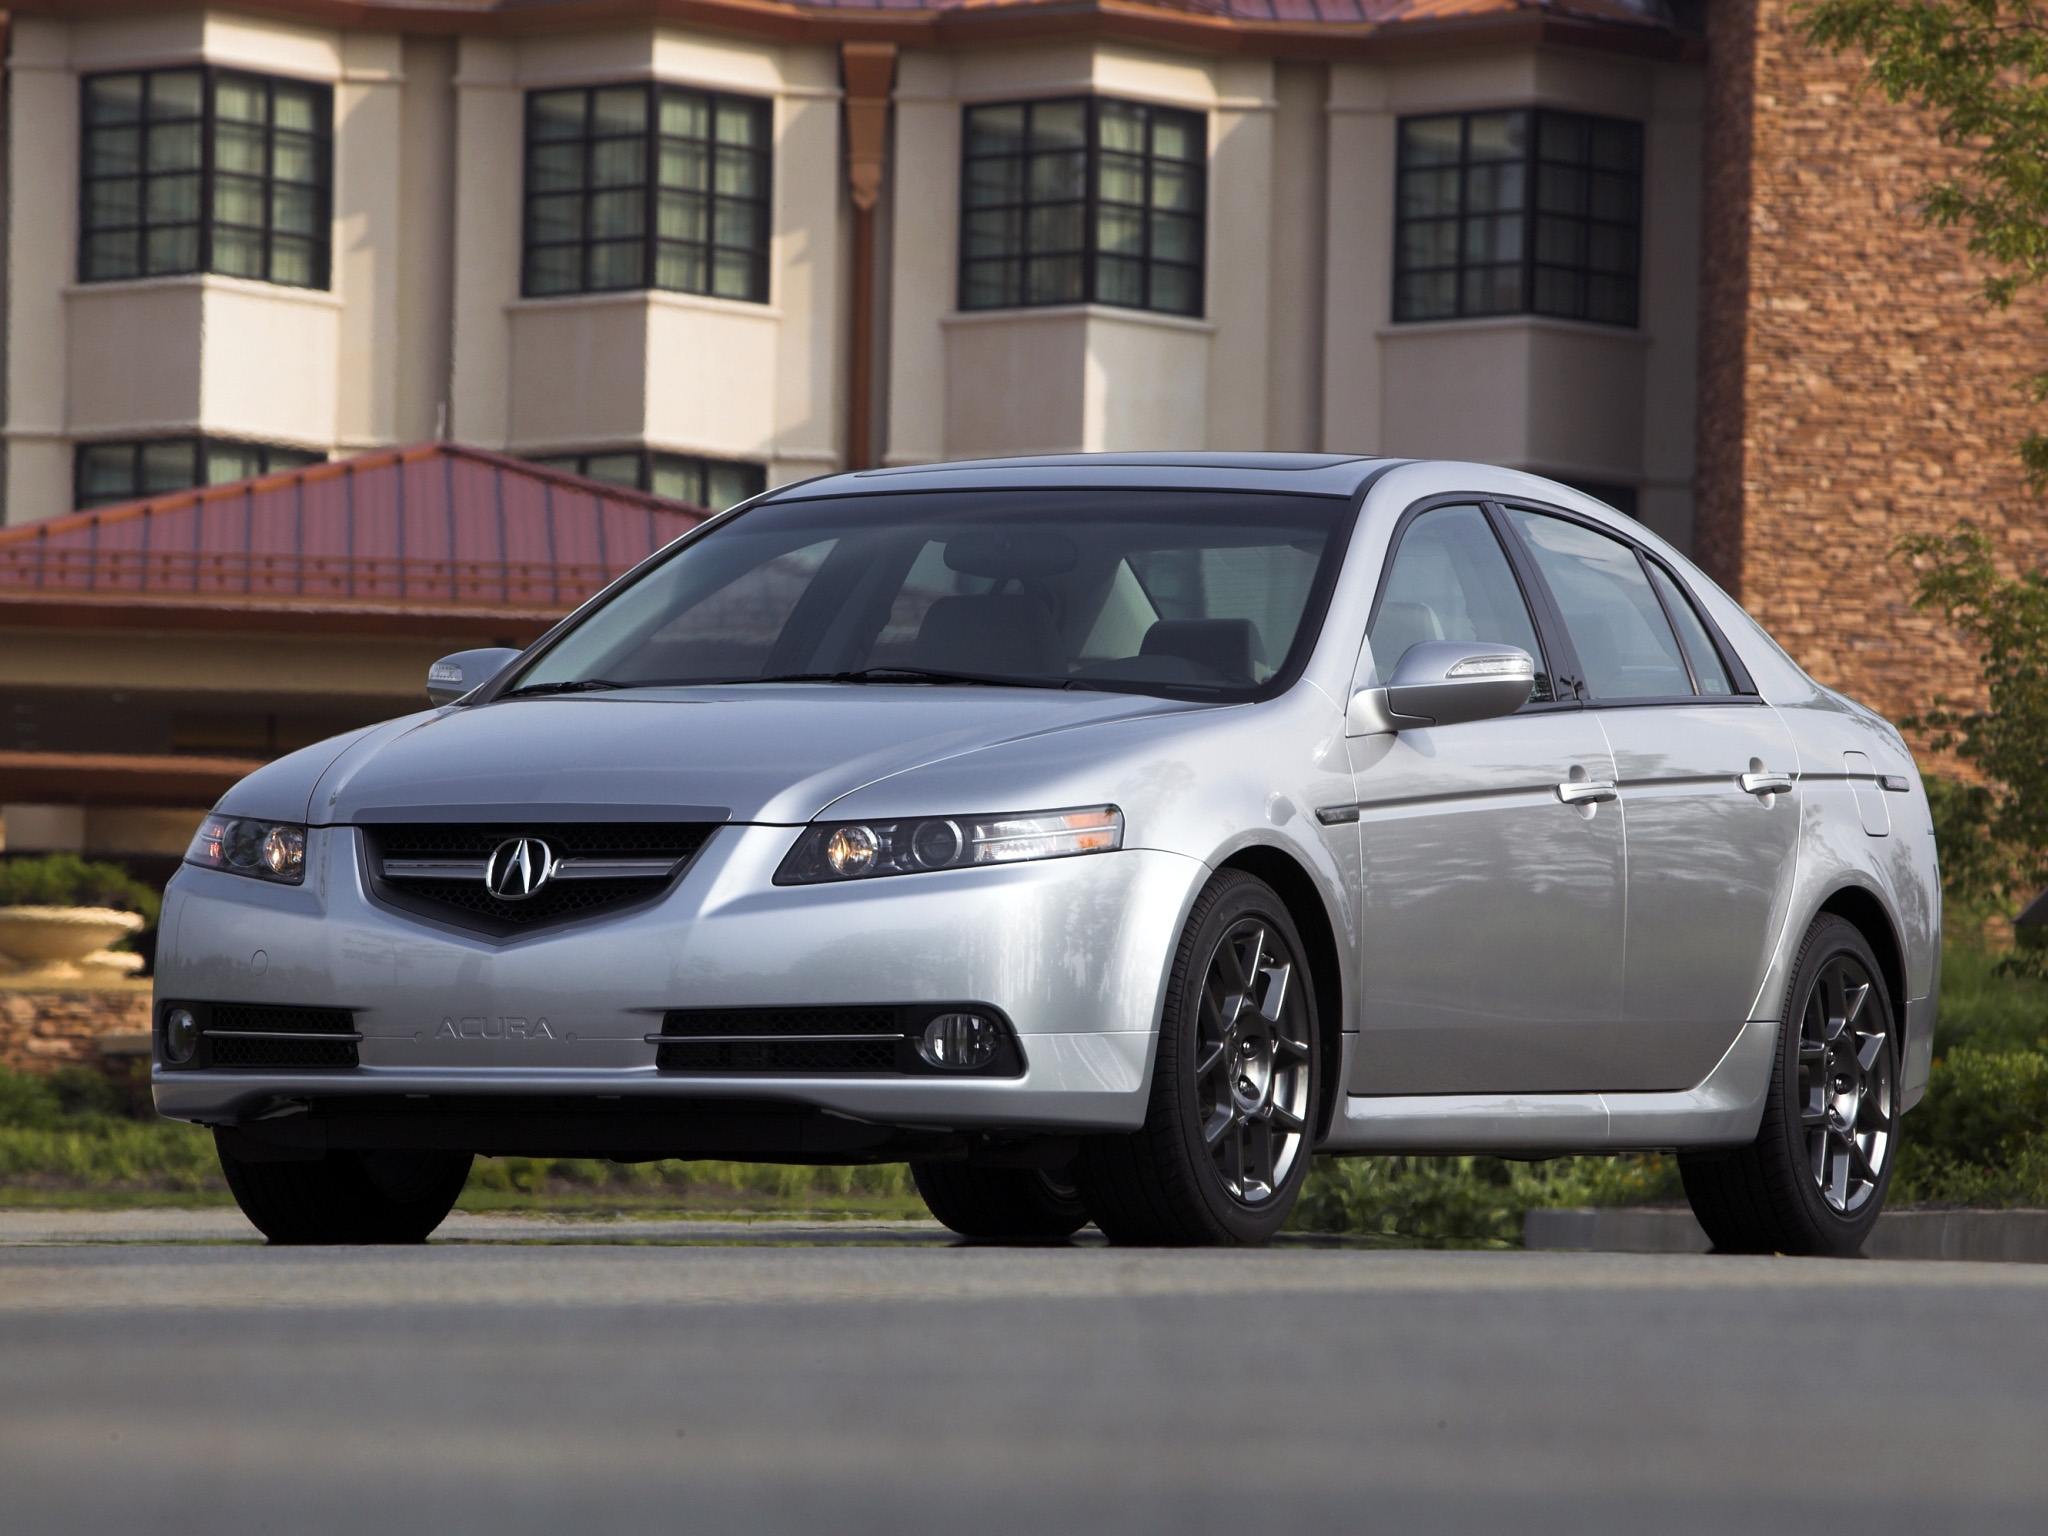 front view, auto, grass, acura, cars, building, style, tl, 2007, silver metallic High Definition image